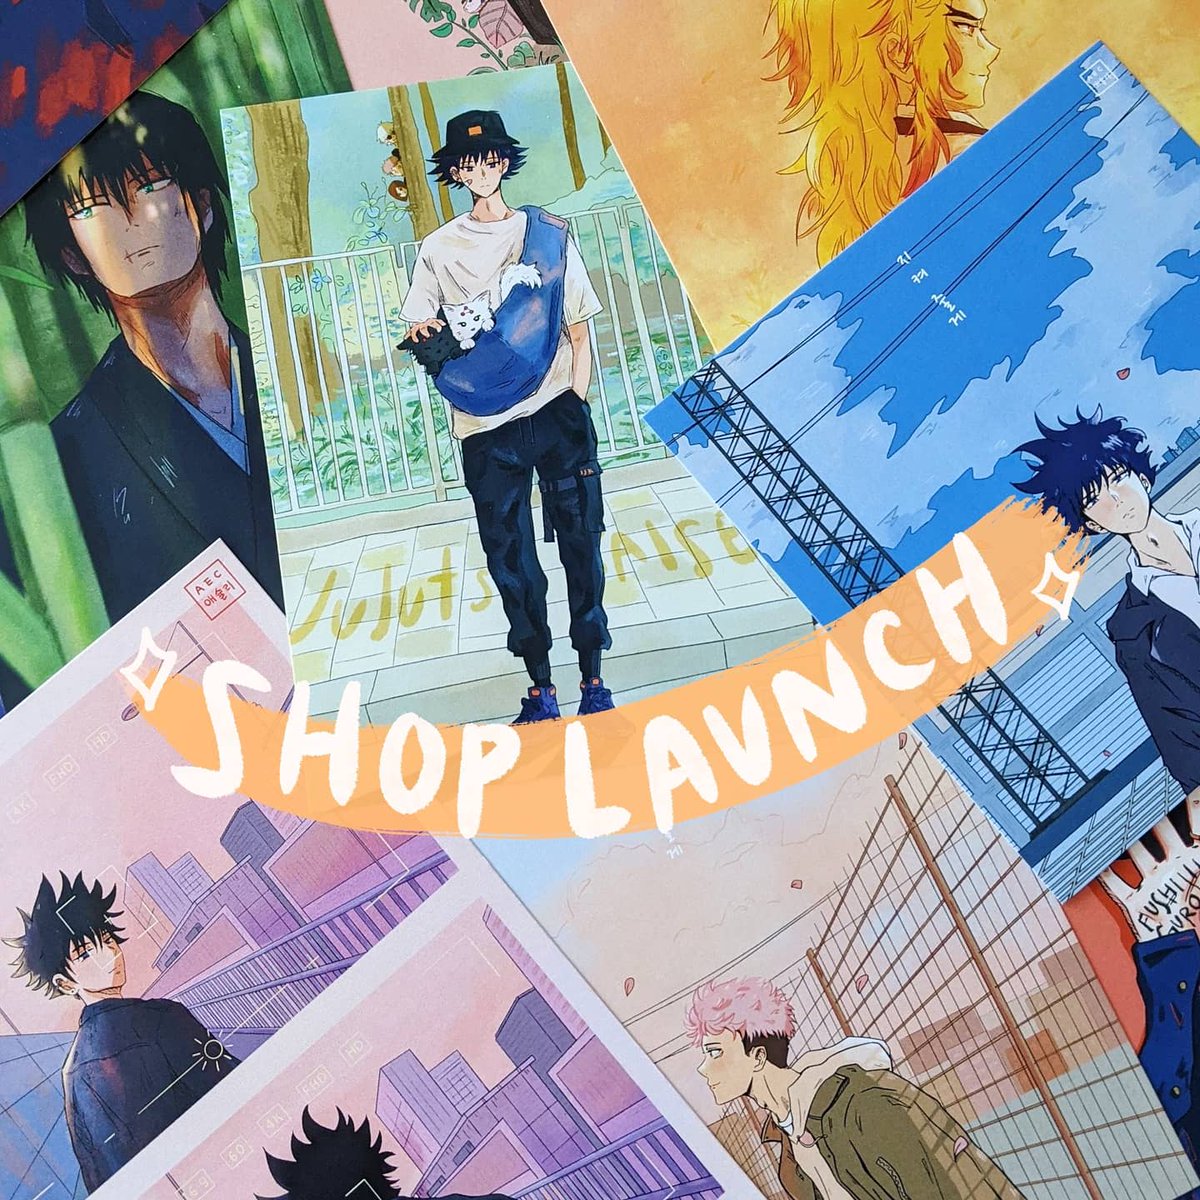 🤍 RT APPRECIATED 🤍 
It's here!! Shop launch next Friday (July 16th) at 12pm PST !! 

🏷️ Shop consists of prints + stickers
🌏  International shipping available
💌 Shipping comes with tracking
🌸 Shop link will be updated in bio
⏳ I'll add a countdown soon! 